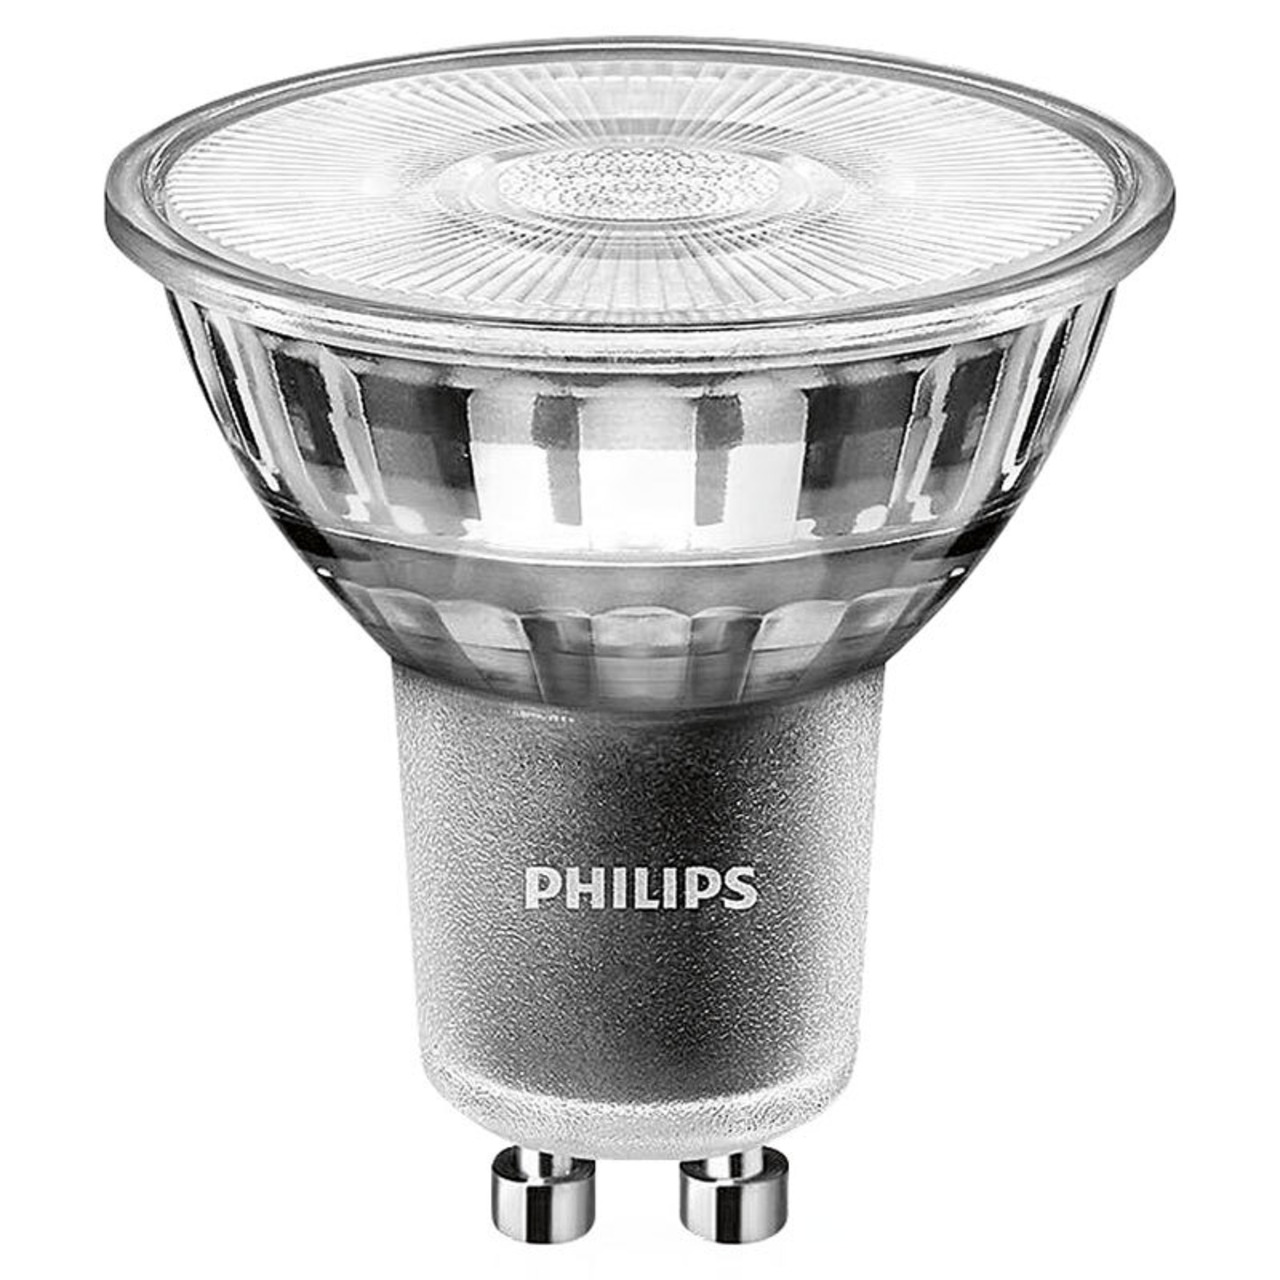 Philips MASTER ExpertColor 5-5-W-GU10-LED-Lampe- 400 lm- 97 Ra- 36 - 4000K- neutralweiss- dimmbar